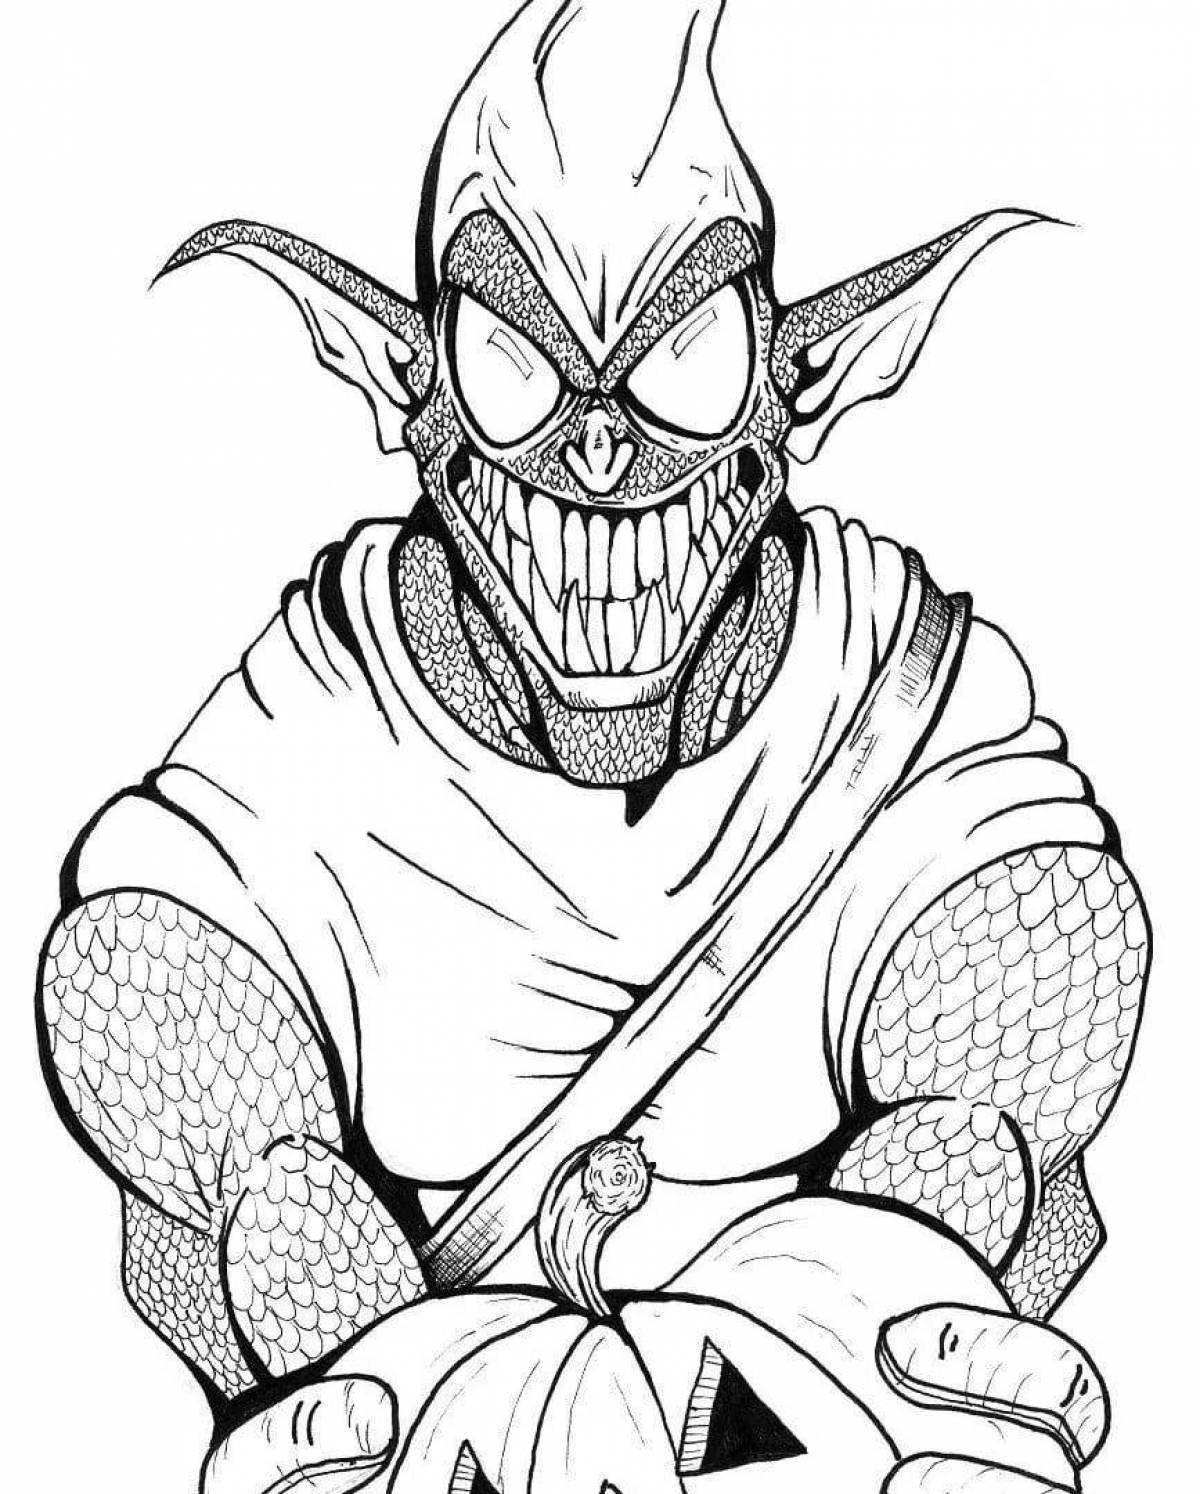 Fabulous goblin coloring page